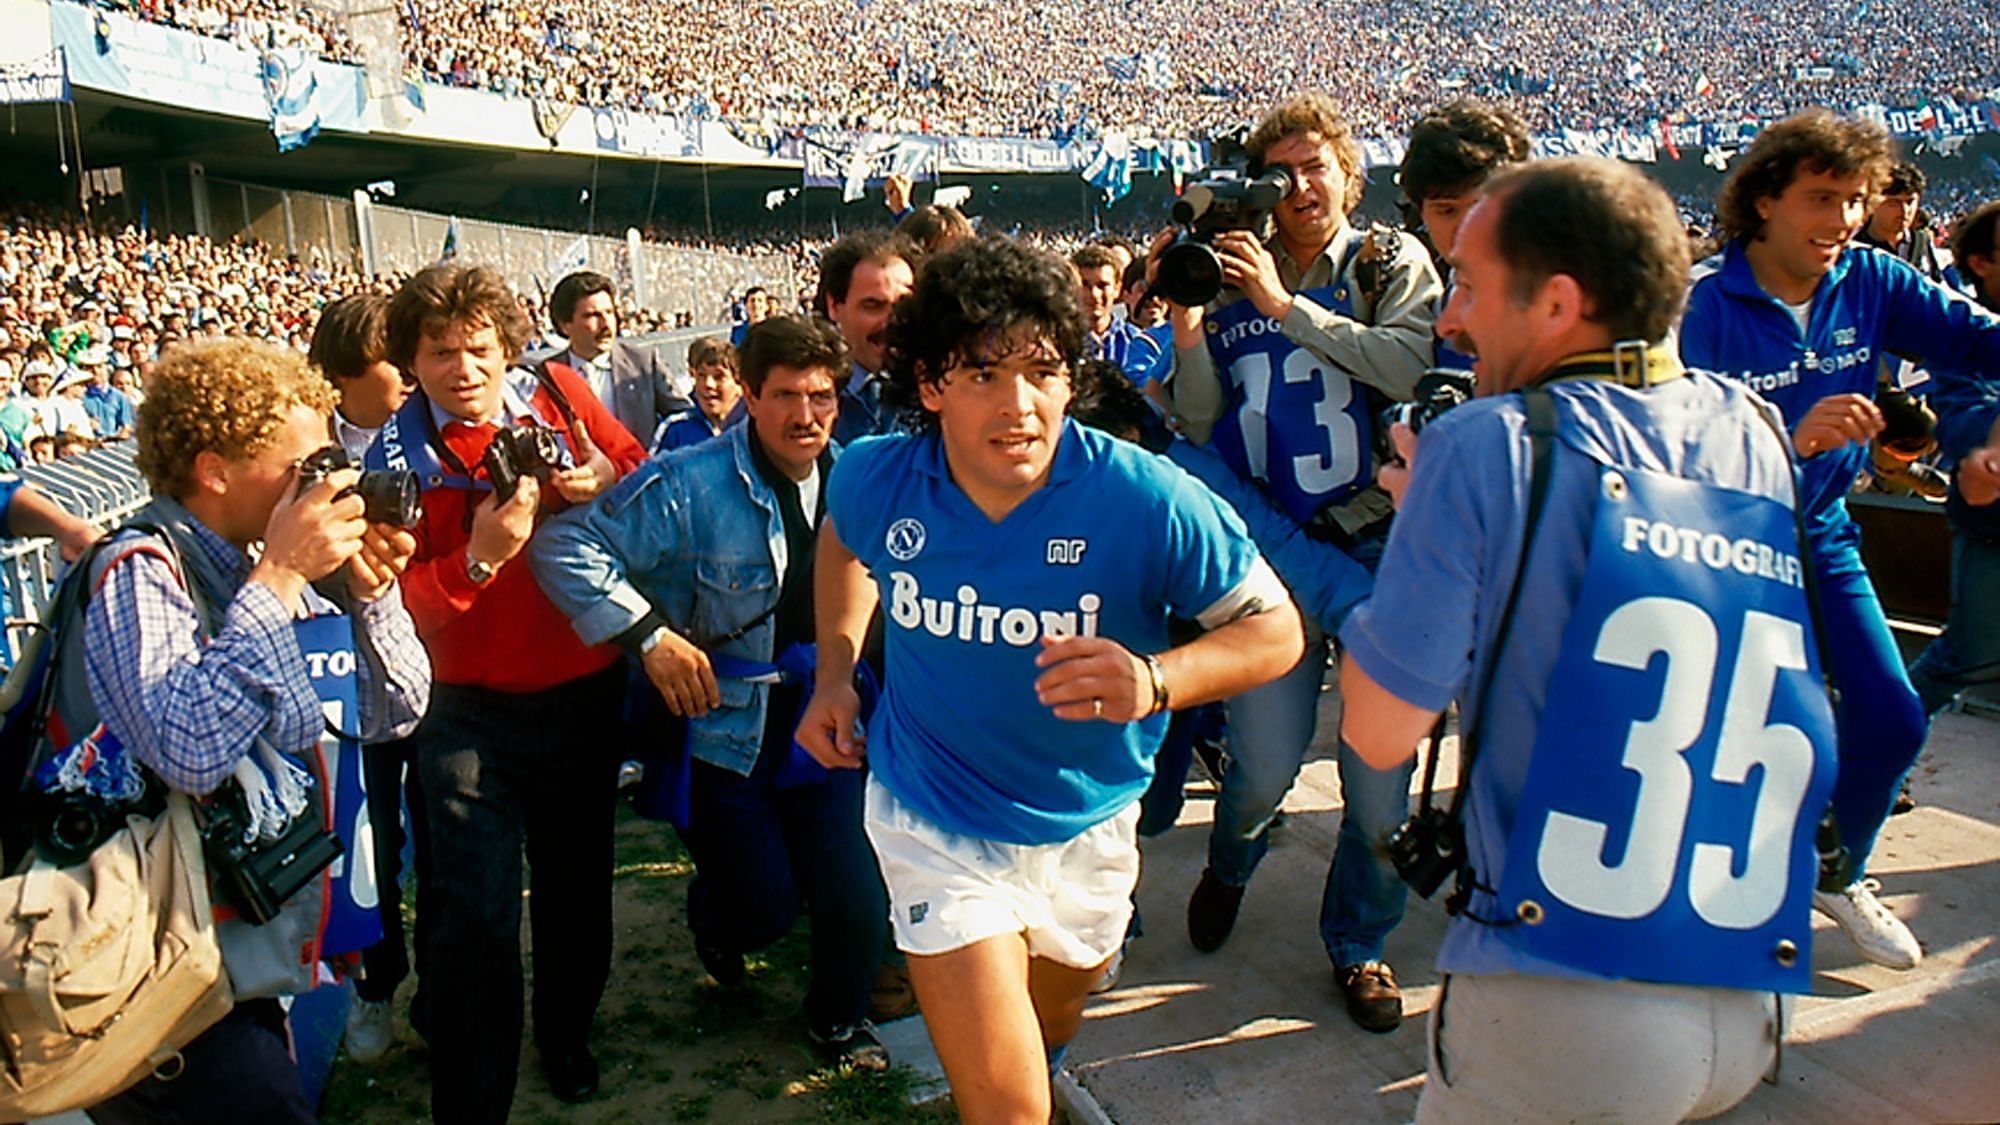 Diego Maradona has asked the “Hand of God” to end this pandemic.